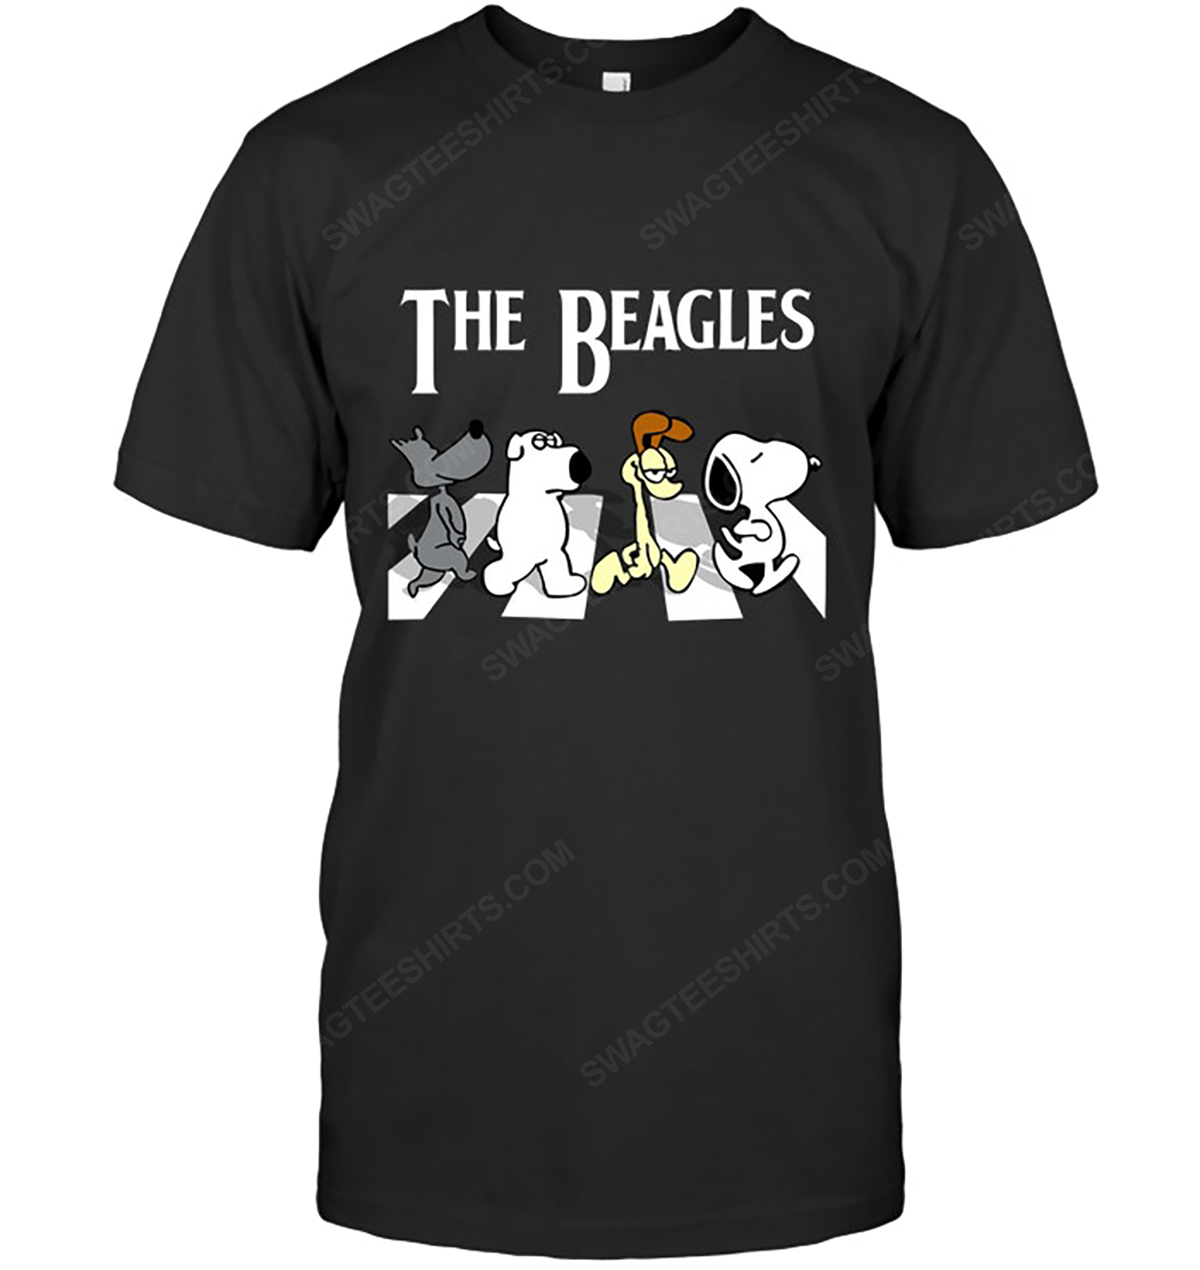 Snoopy and friends the beagles abbey road tshirt 1